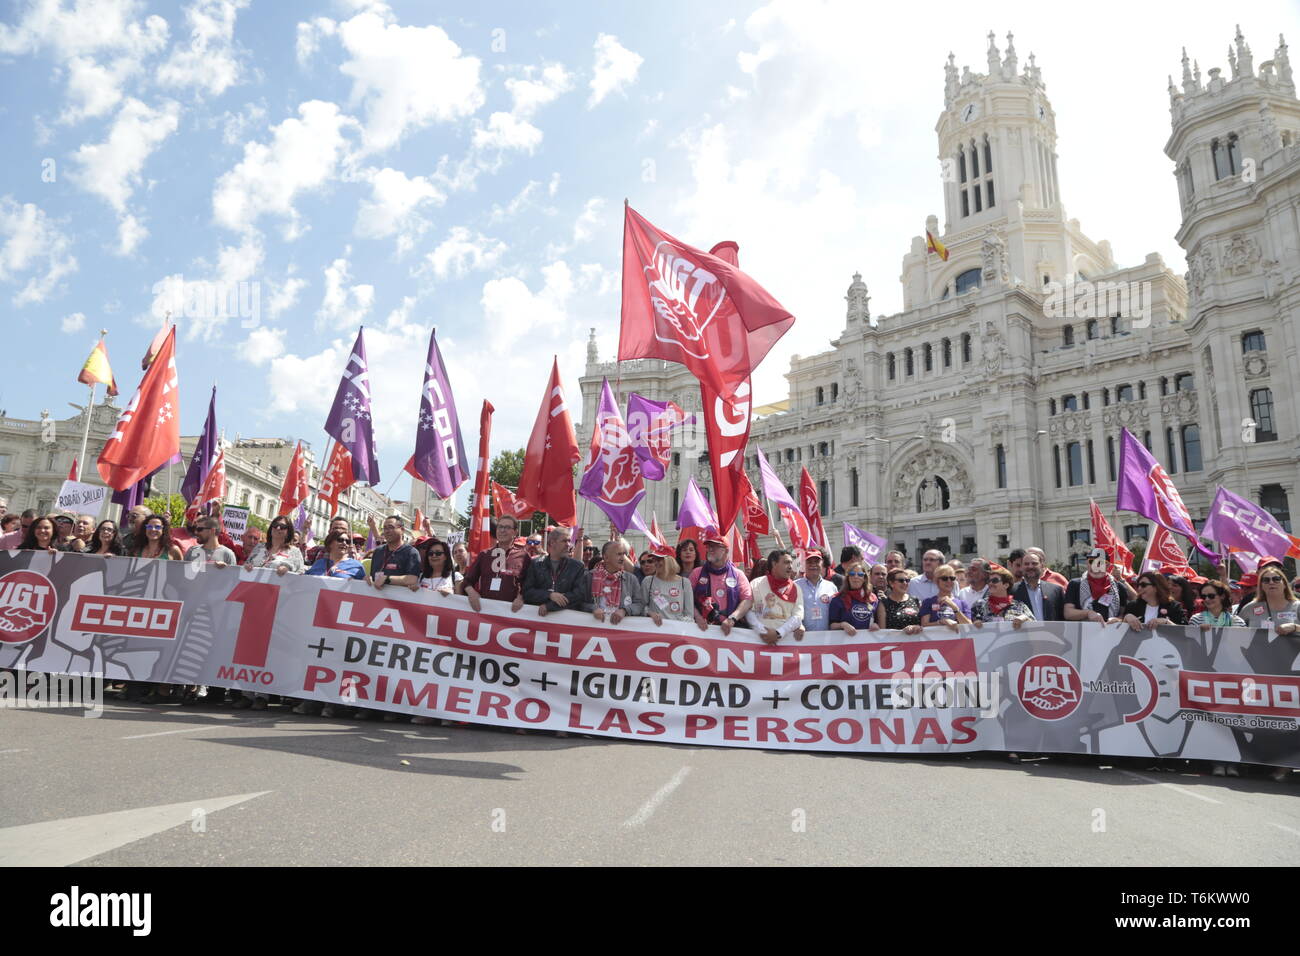 Protesters are seen holding a banner and flags during the demonstration. Thousands of protesters demonstrate on the International Workers' Day convoked by the majority unions UGT and CCOO to demand policies and reductions in unemployment levels in Spain, against job insecurity and labour rights. Politicians of the PSOE and Podemos have participated in the demonstration. Stock Photo